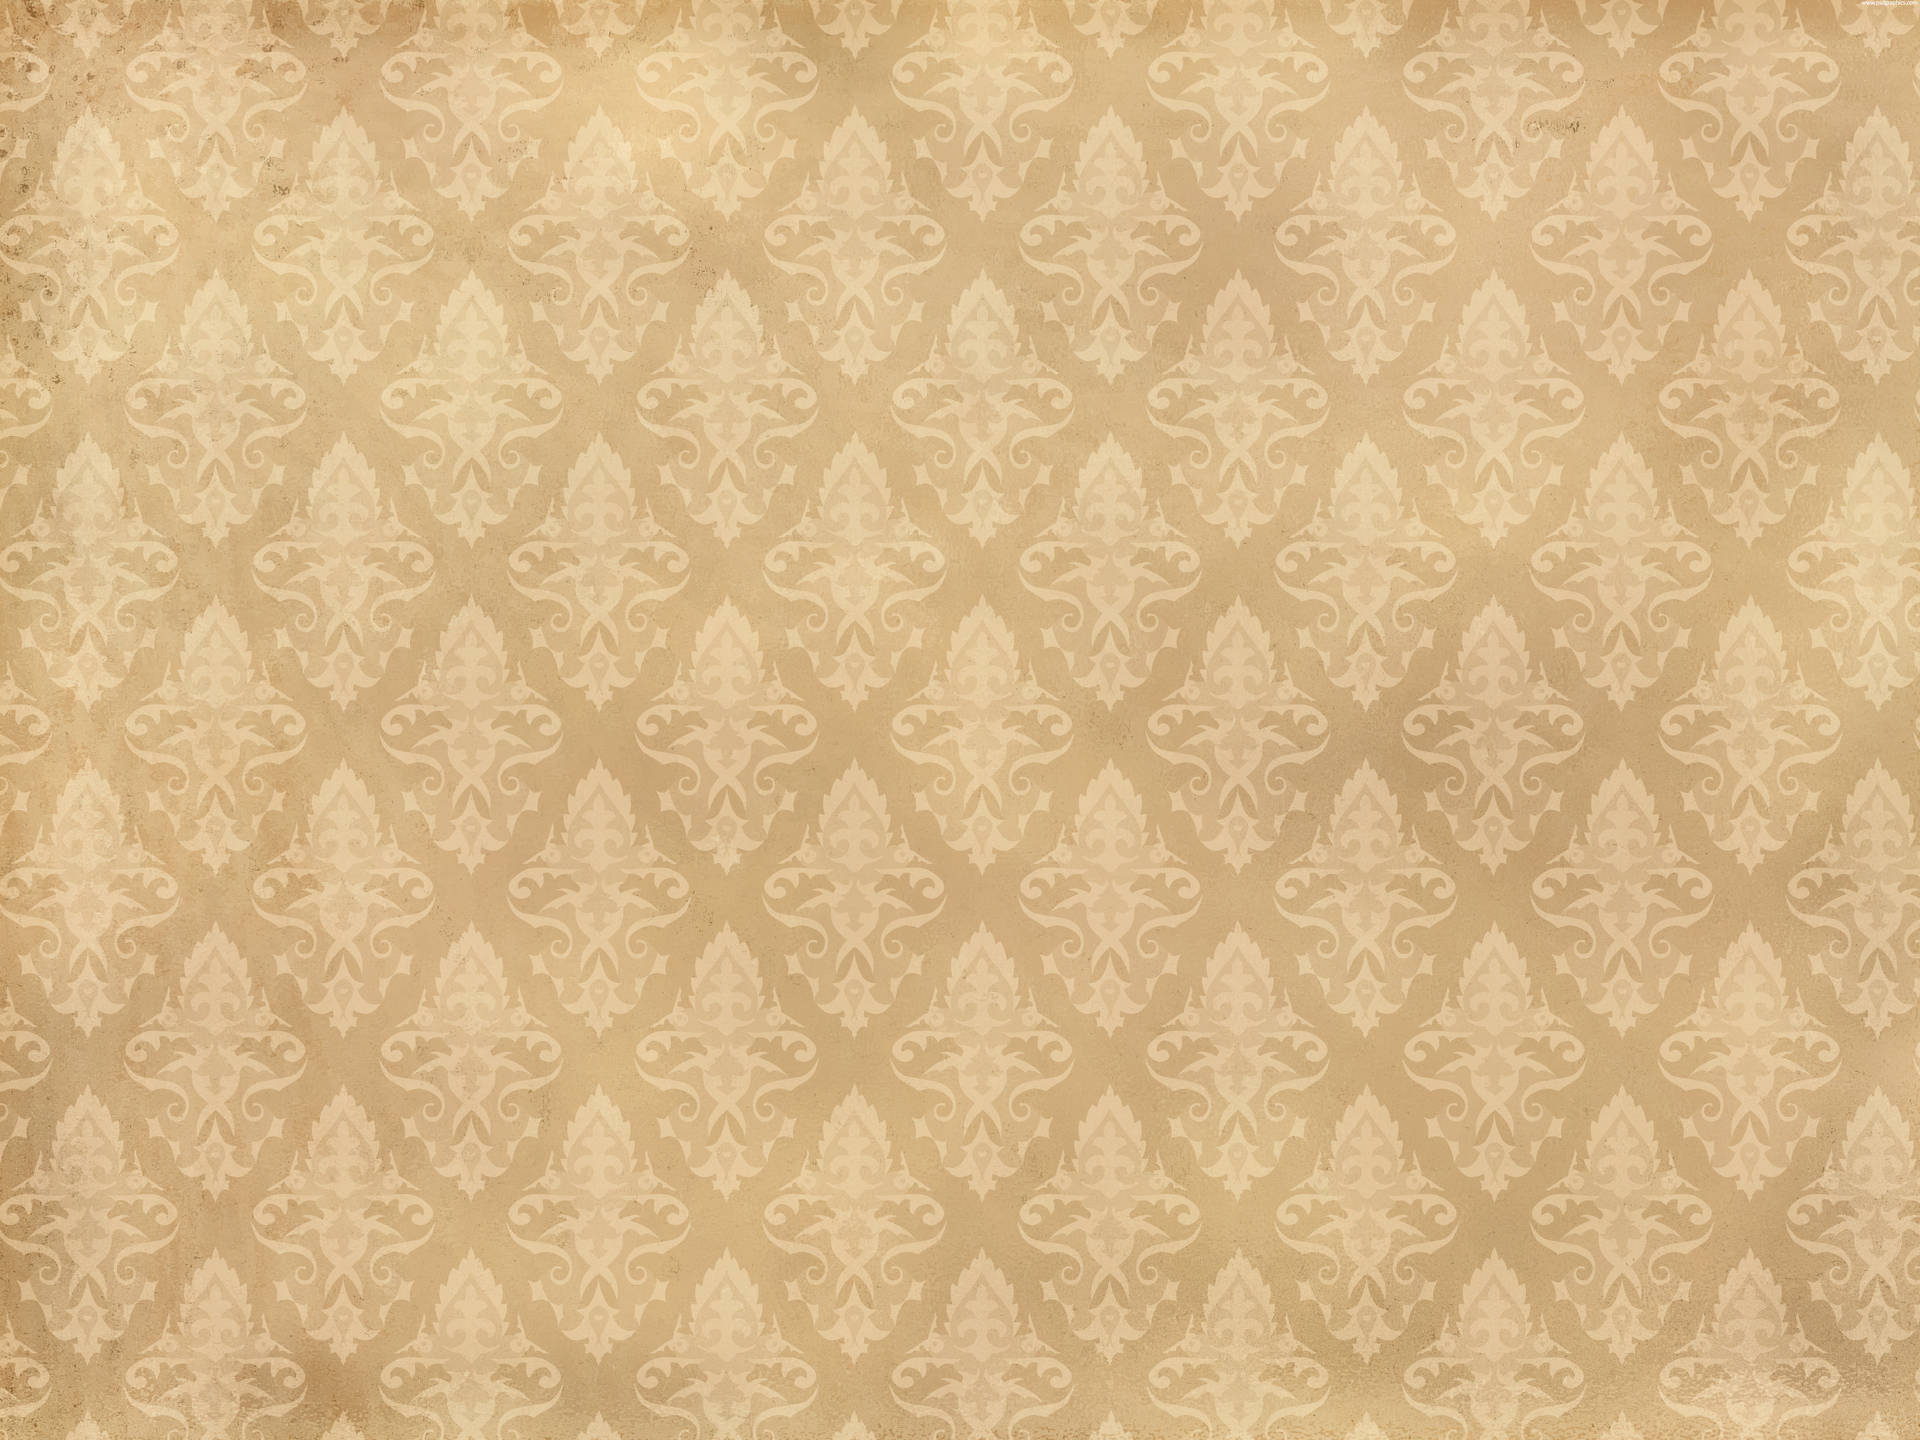 Free Light Brown Wallpaper Downloads, [100+] Light Brown Wallpapers for  FREE 